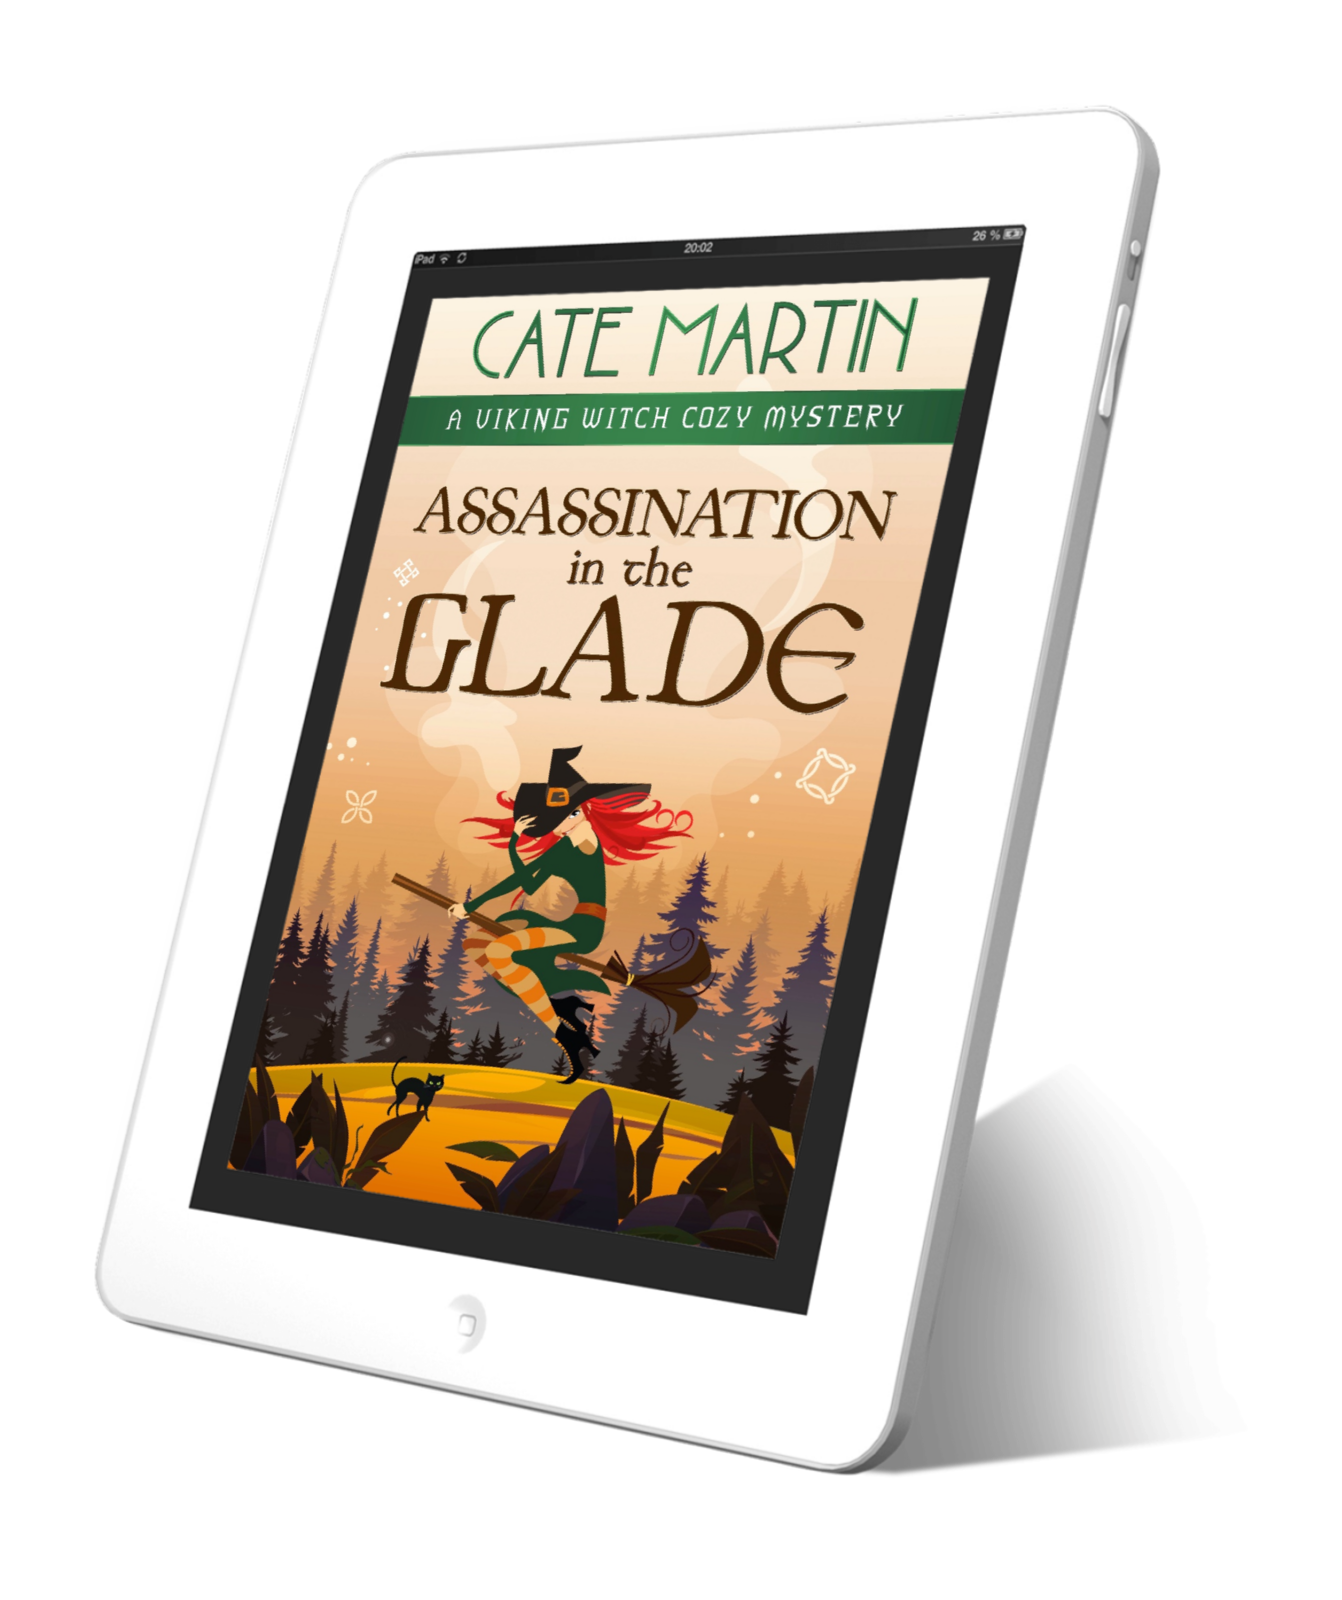 Cover for the ebook titled Assassination in the Glade, book 11 in the viking witch cozy mystery series.